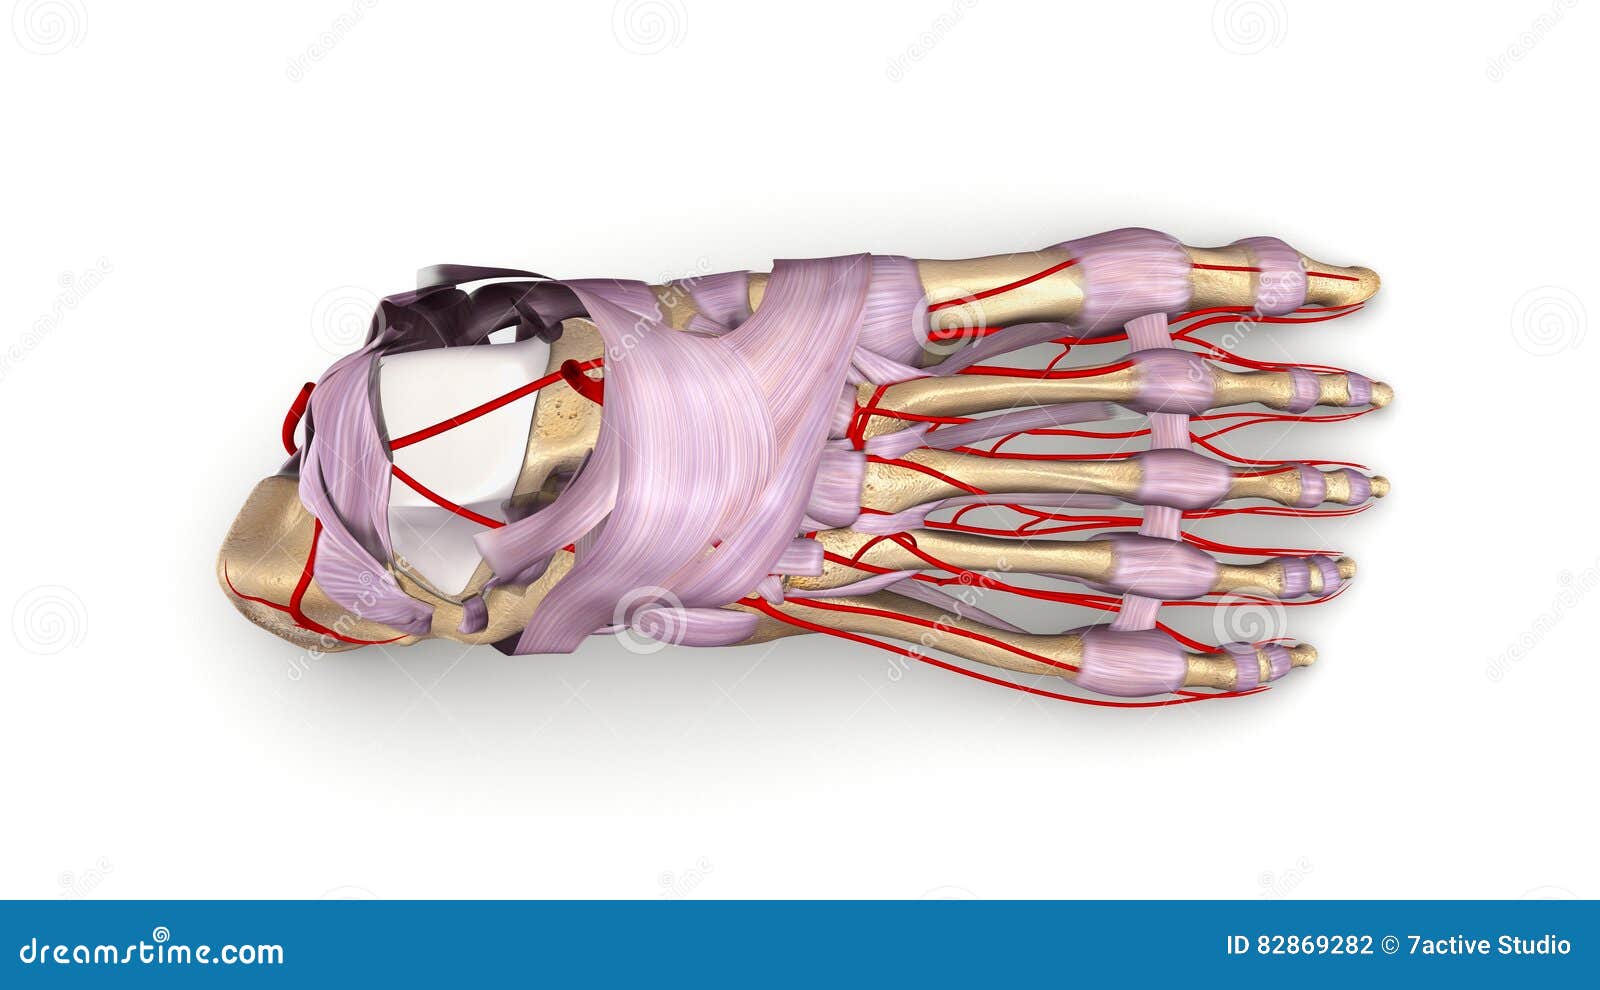 foot bones with ligaments and arteries top view